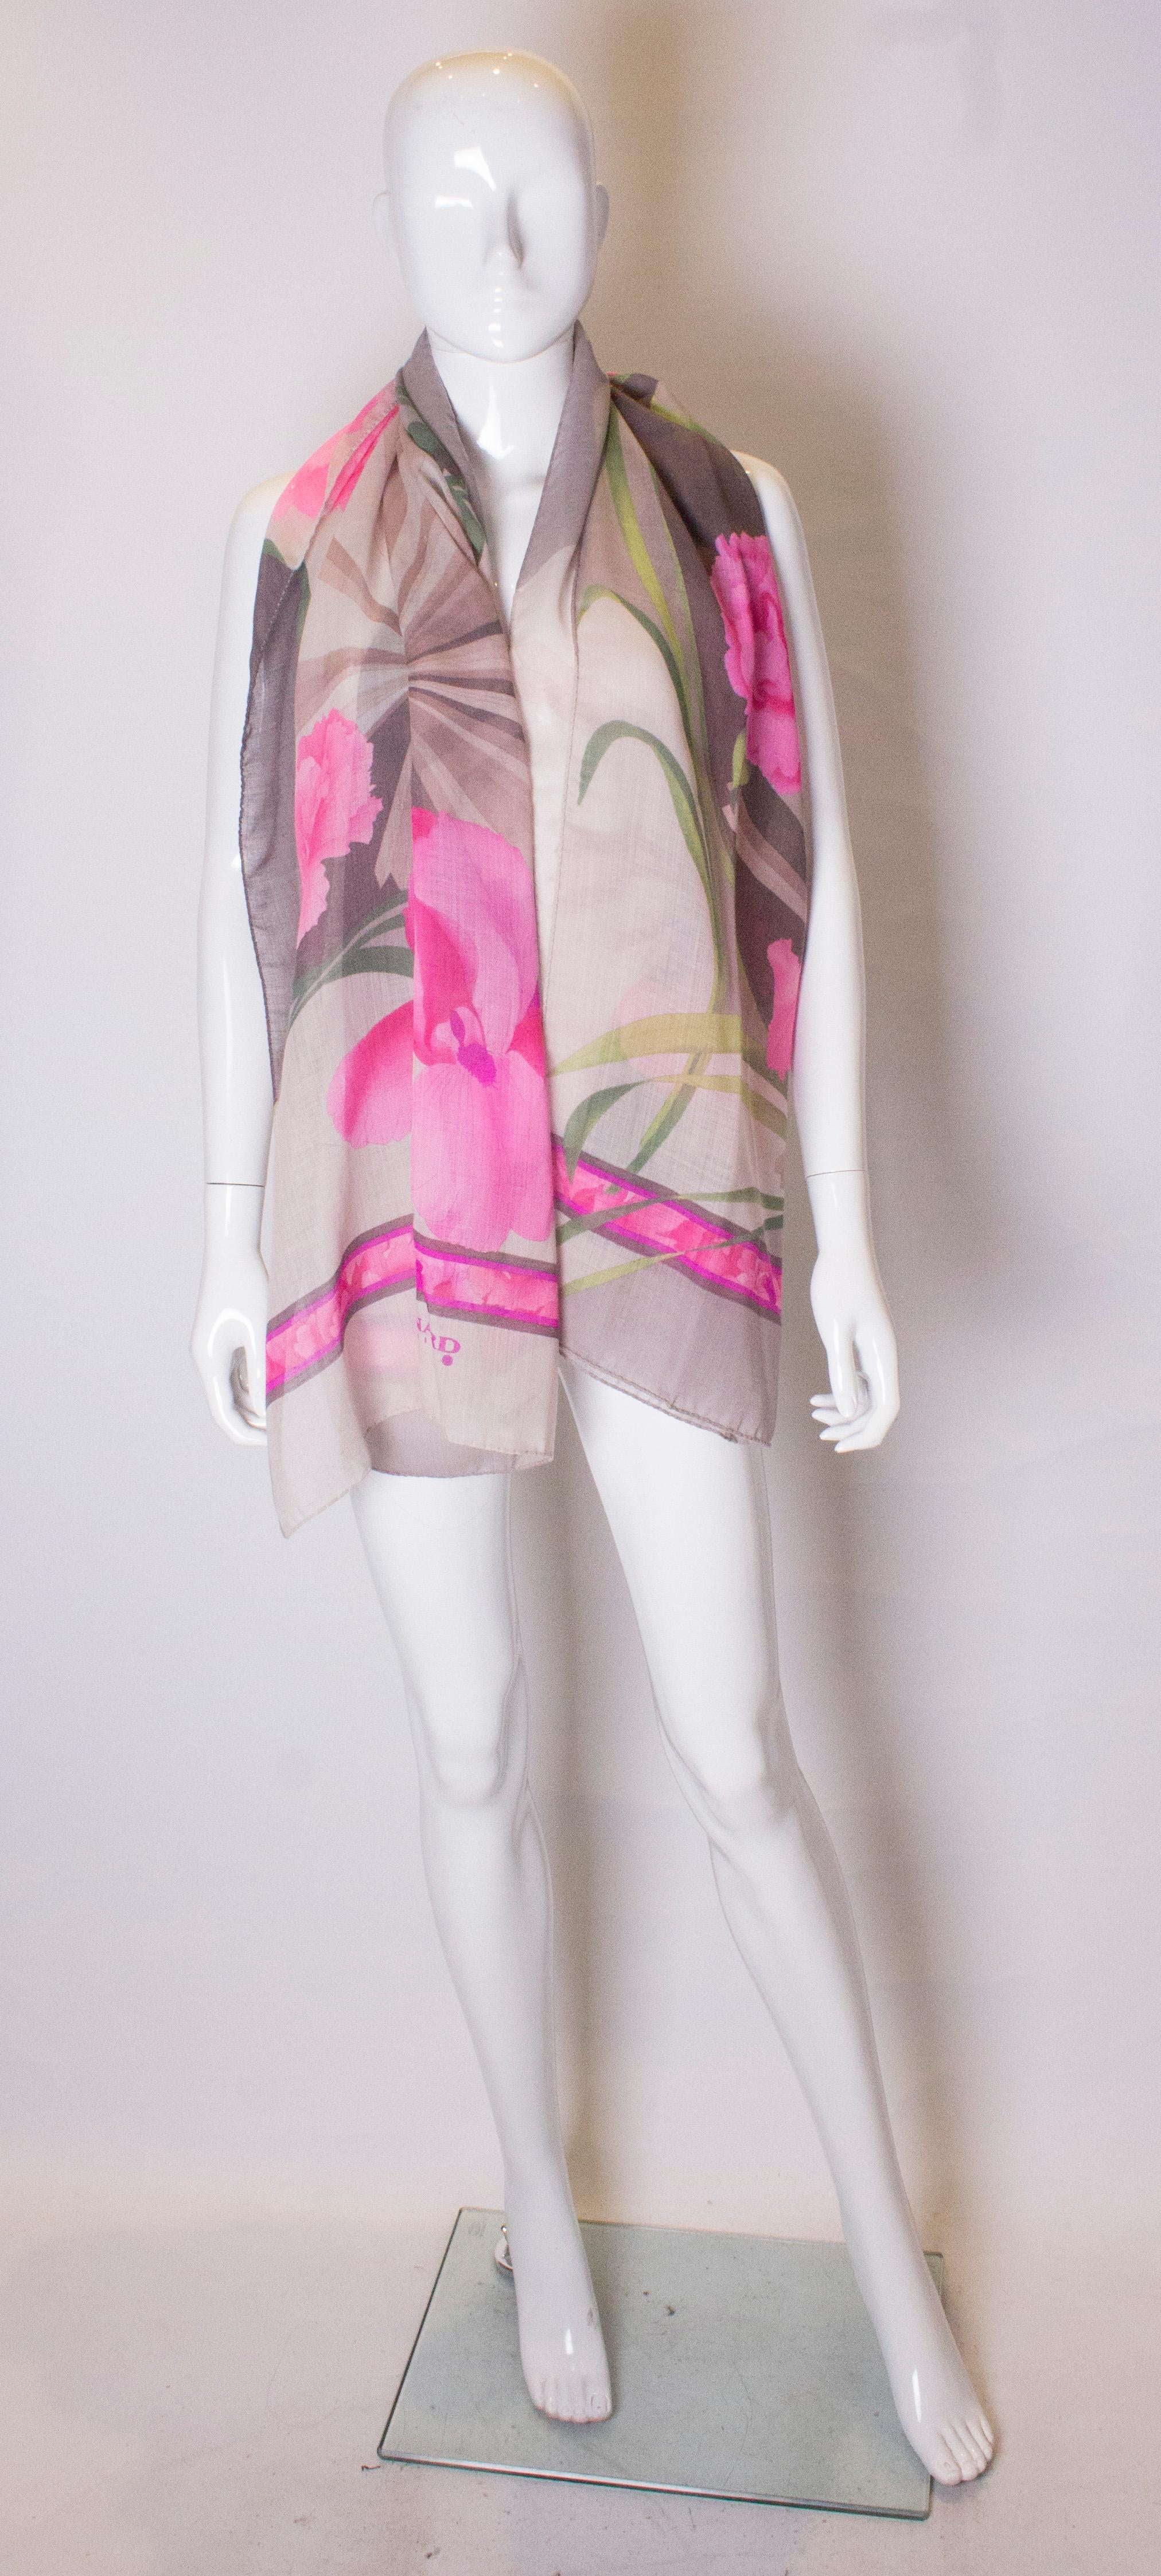 A stunning wool shawl by Leonard ,Paris. The shawl is hand rolled and has a beige bakcground with a pink floral print.